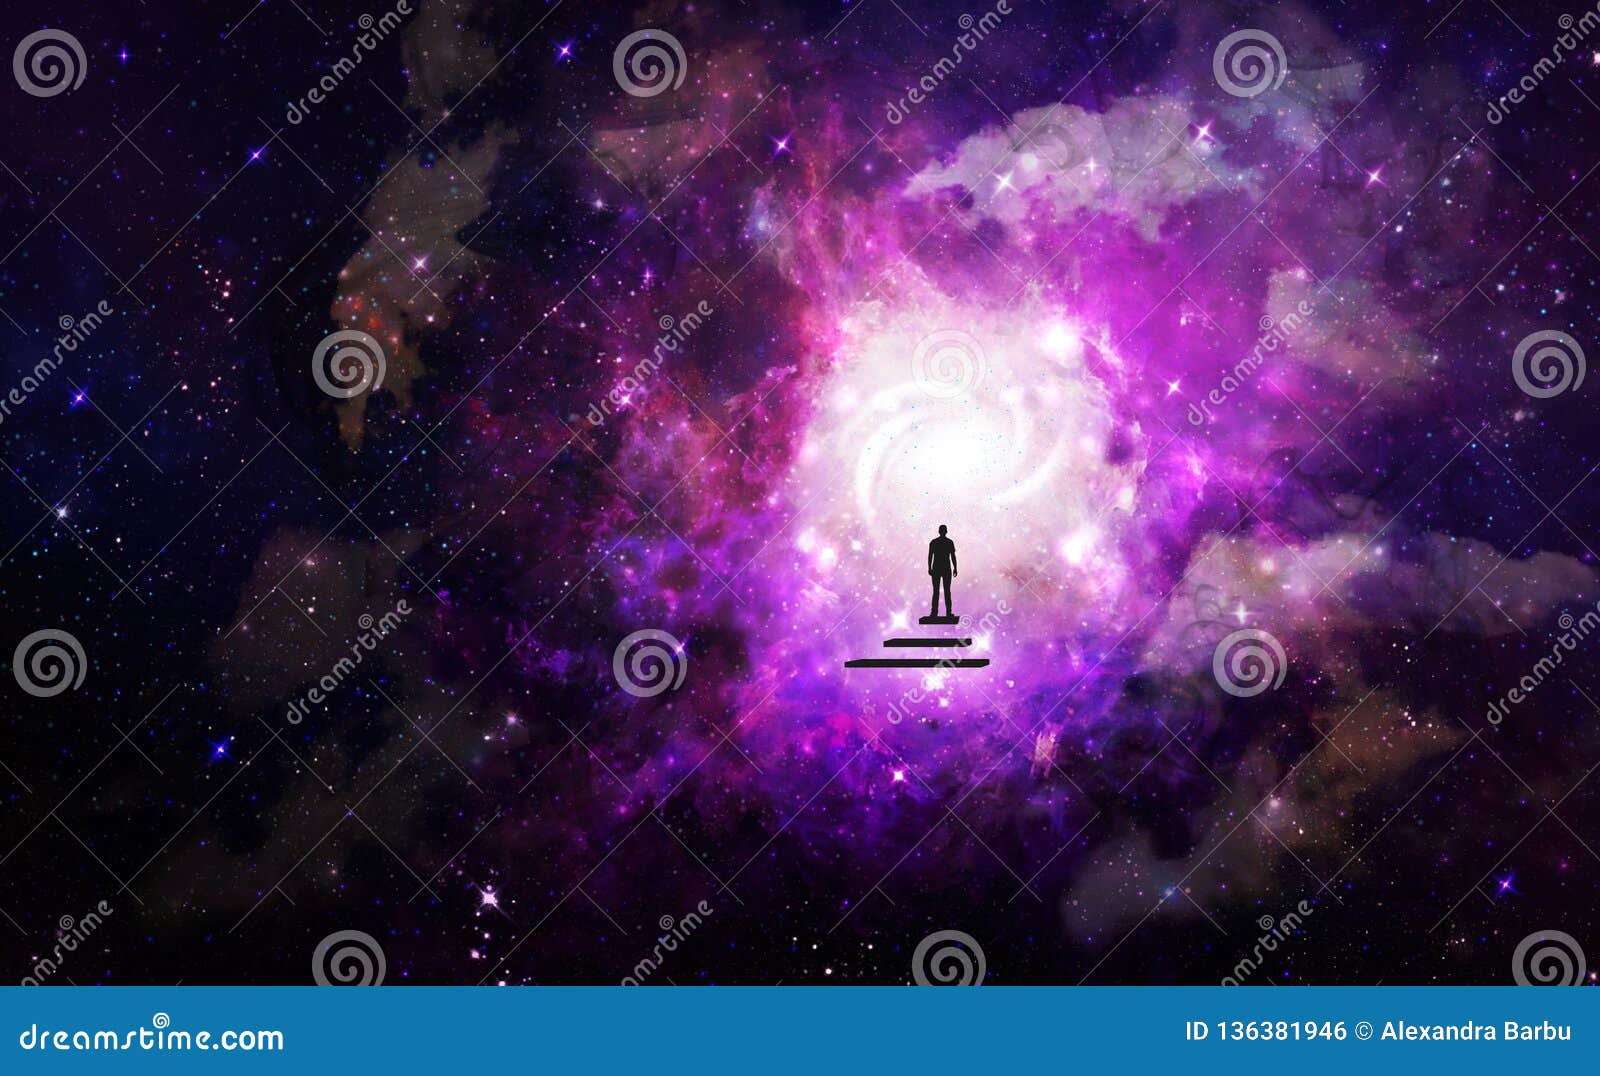 man soul journey, portal to another universe wallpaper